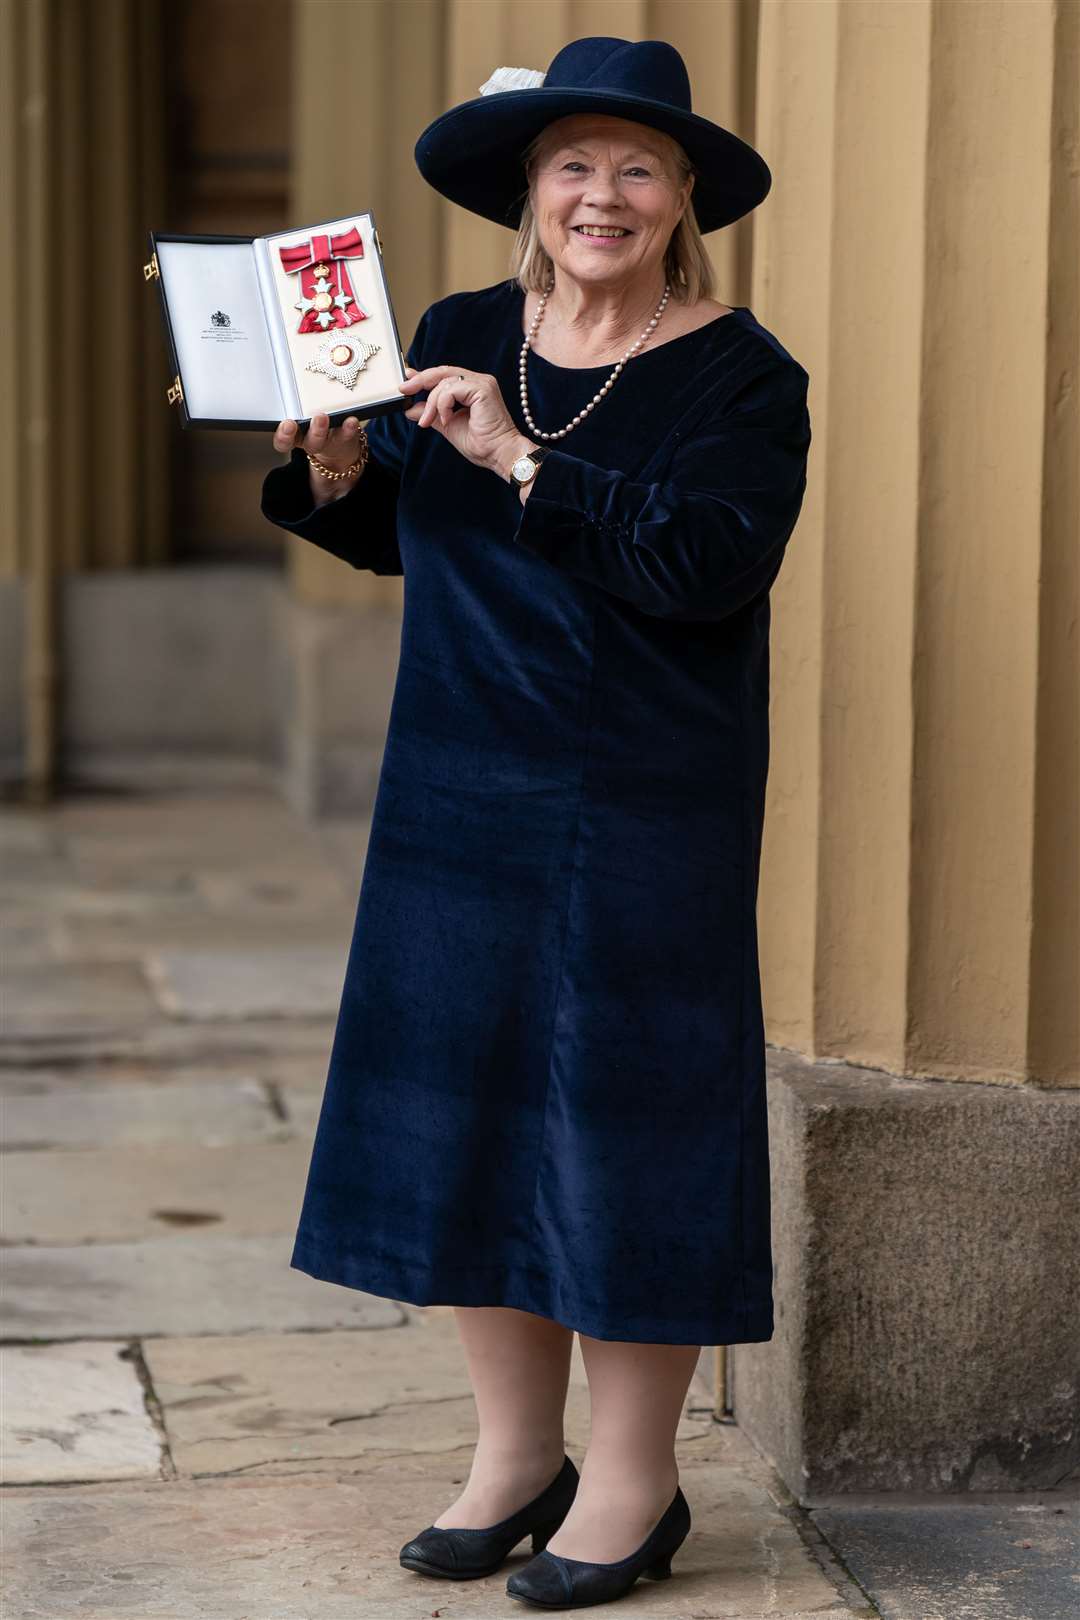 Dame Ann Limb now works for The Prince’s Foundation, which was set up by the King in 1986 (Aaron Chown/PA)